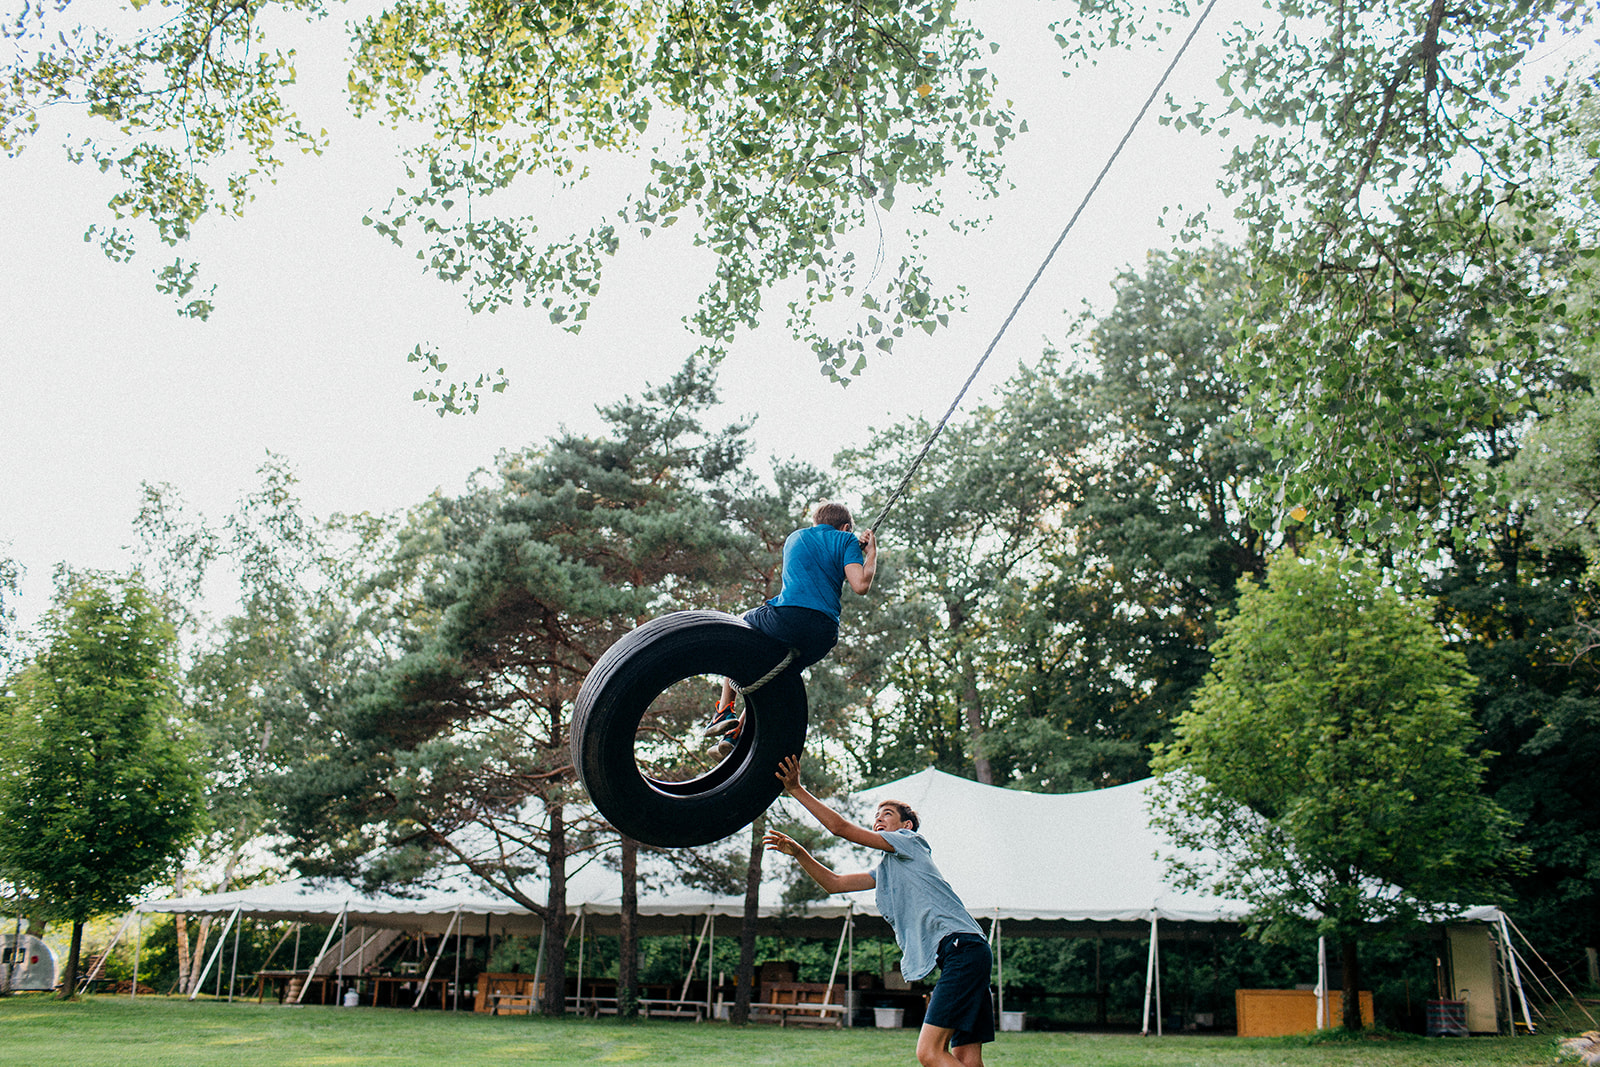 Brothers swinging each other on a tire swing at Camp Wandawega during a wedding weekend